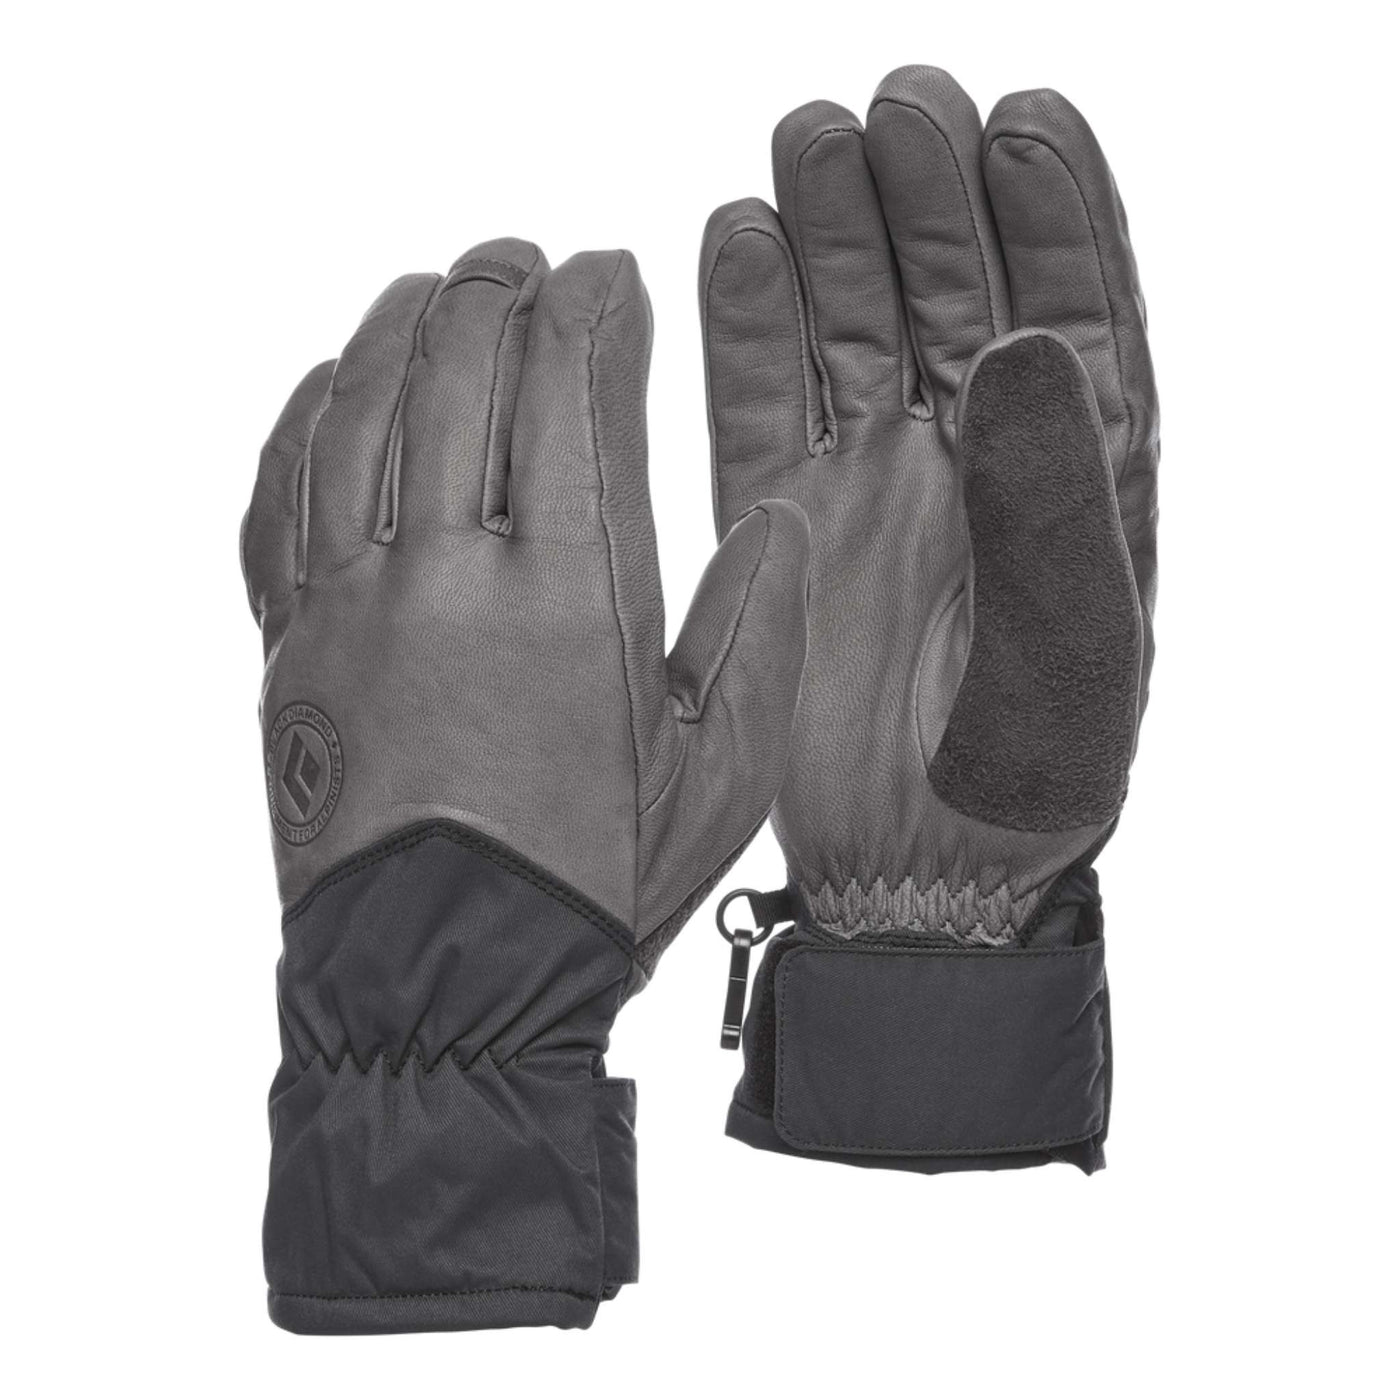 Black Diamond Tour Gloves | Backcountry Leather Gloves NZ | Black COuntry NZ | Further Faster Christchurch NZ #ash